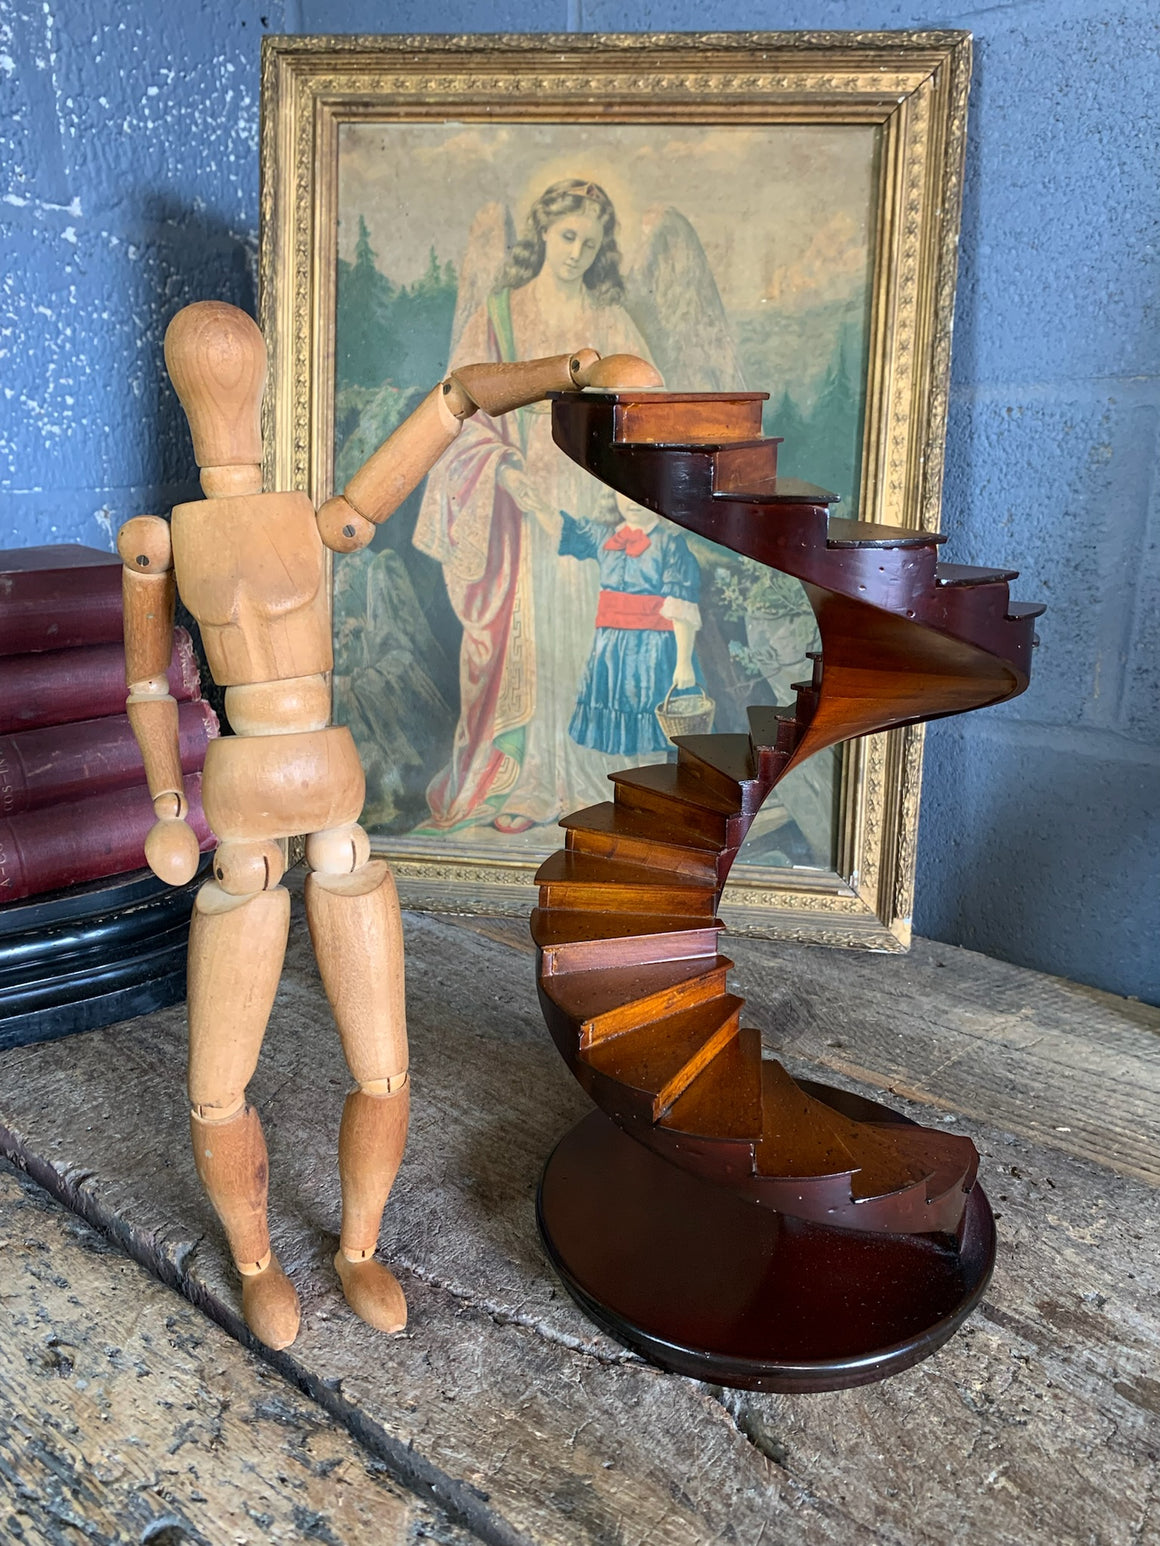 A wooden spiral staircase model